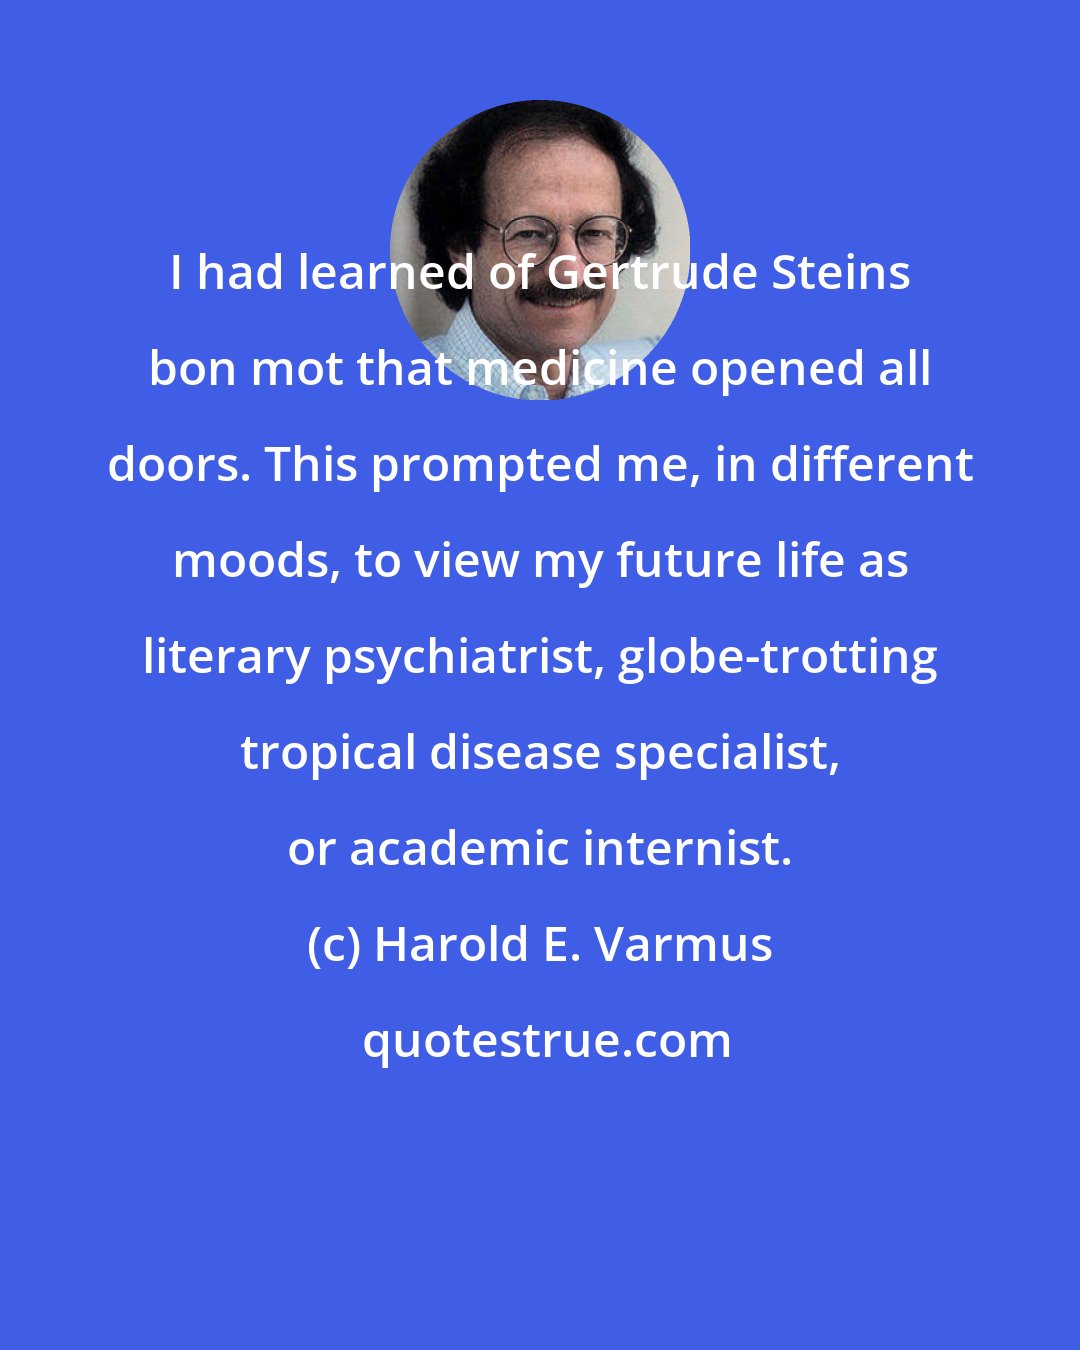 Harold E. Varmus: I had learned of Gertrude Steins bon mot that medicine opened all doors. This prompted me, in different moods, to view my future life as literary psychiatrist, globe-trotting tropical disease specialist, or academic internist.